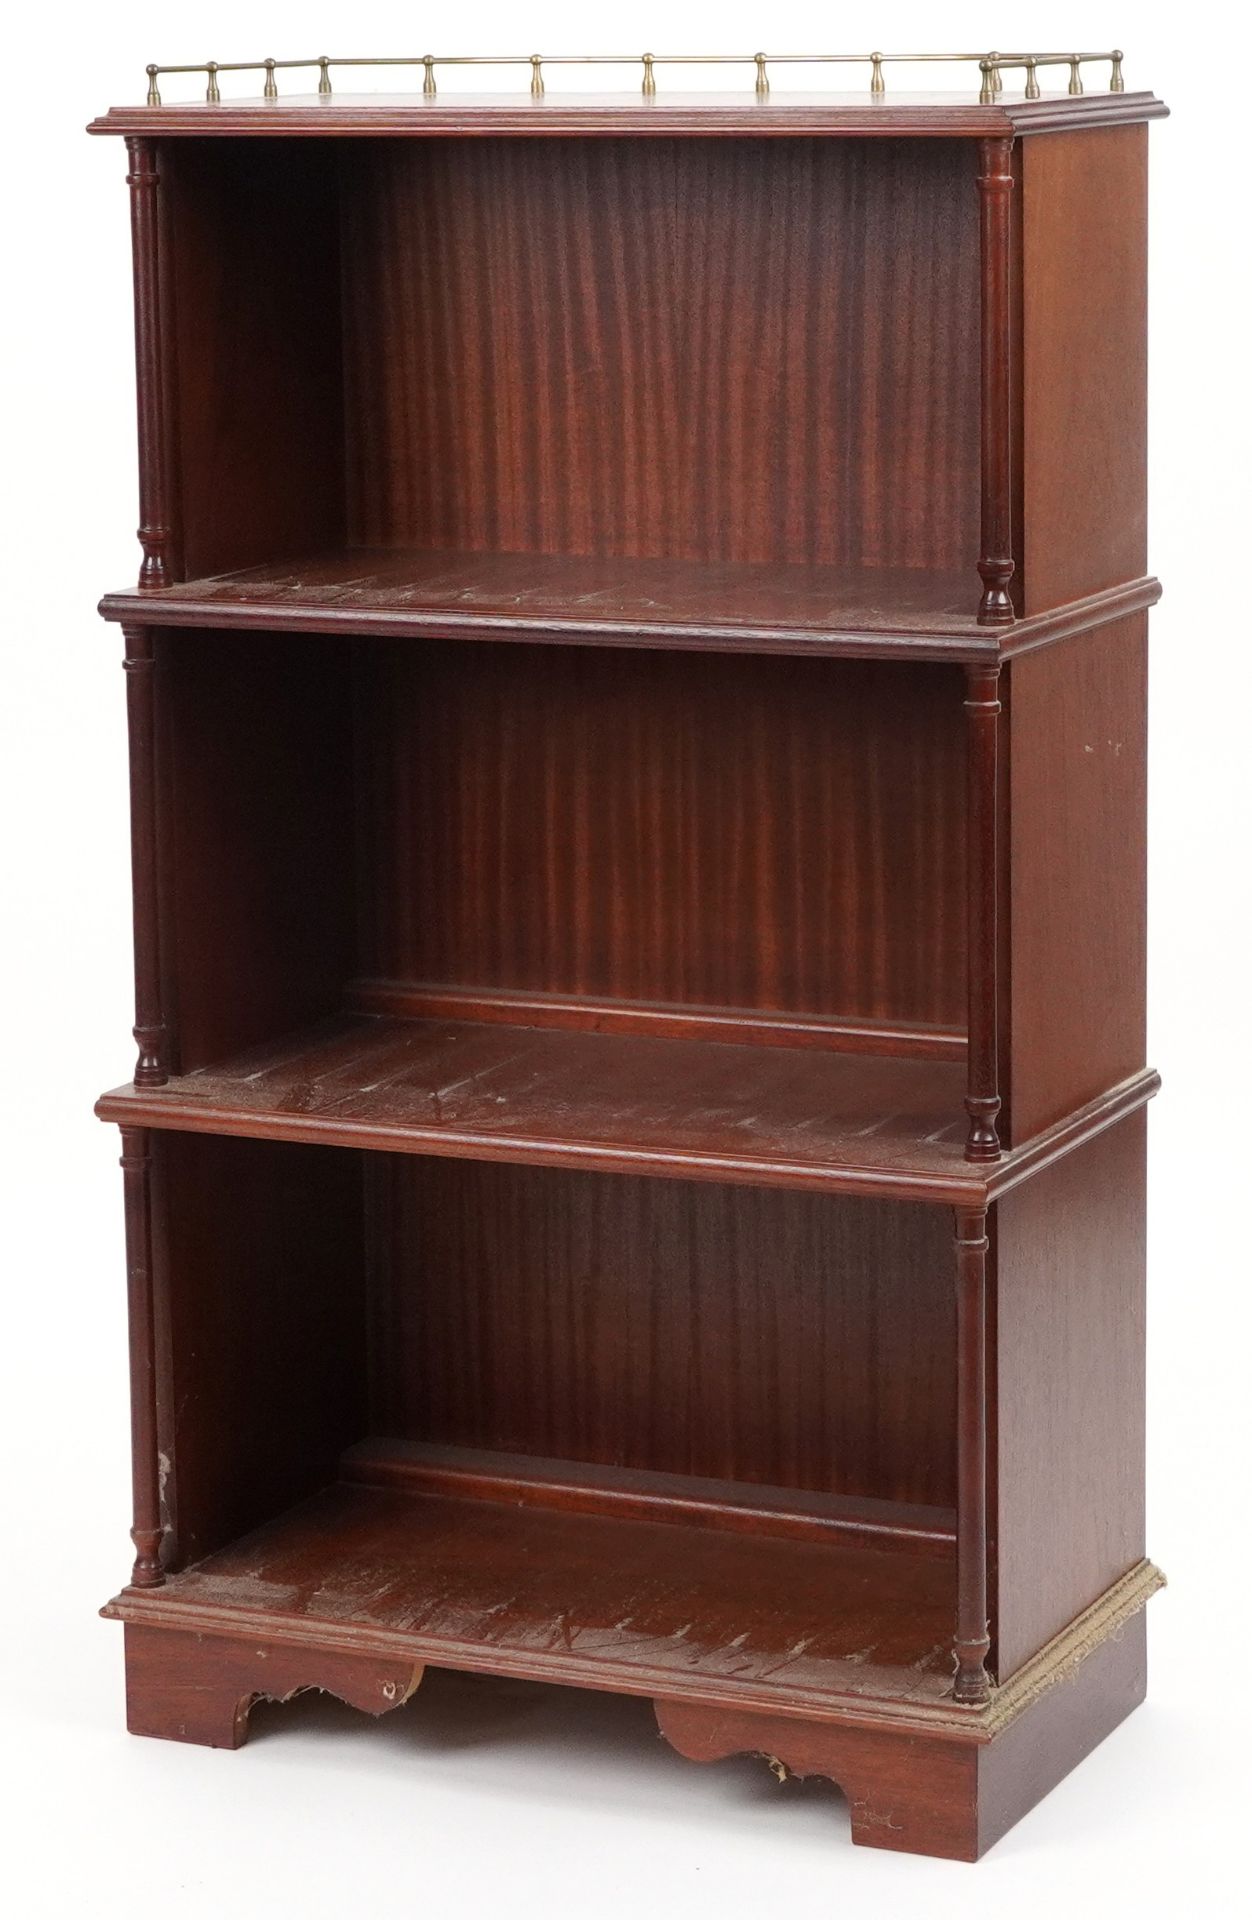 Mahogany four tier waterfall bookcase with brass gallery, 113cm H x 65cm W x 34cm D : For further